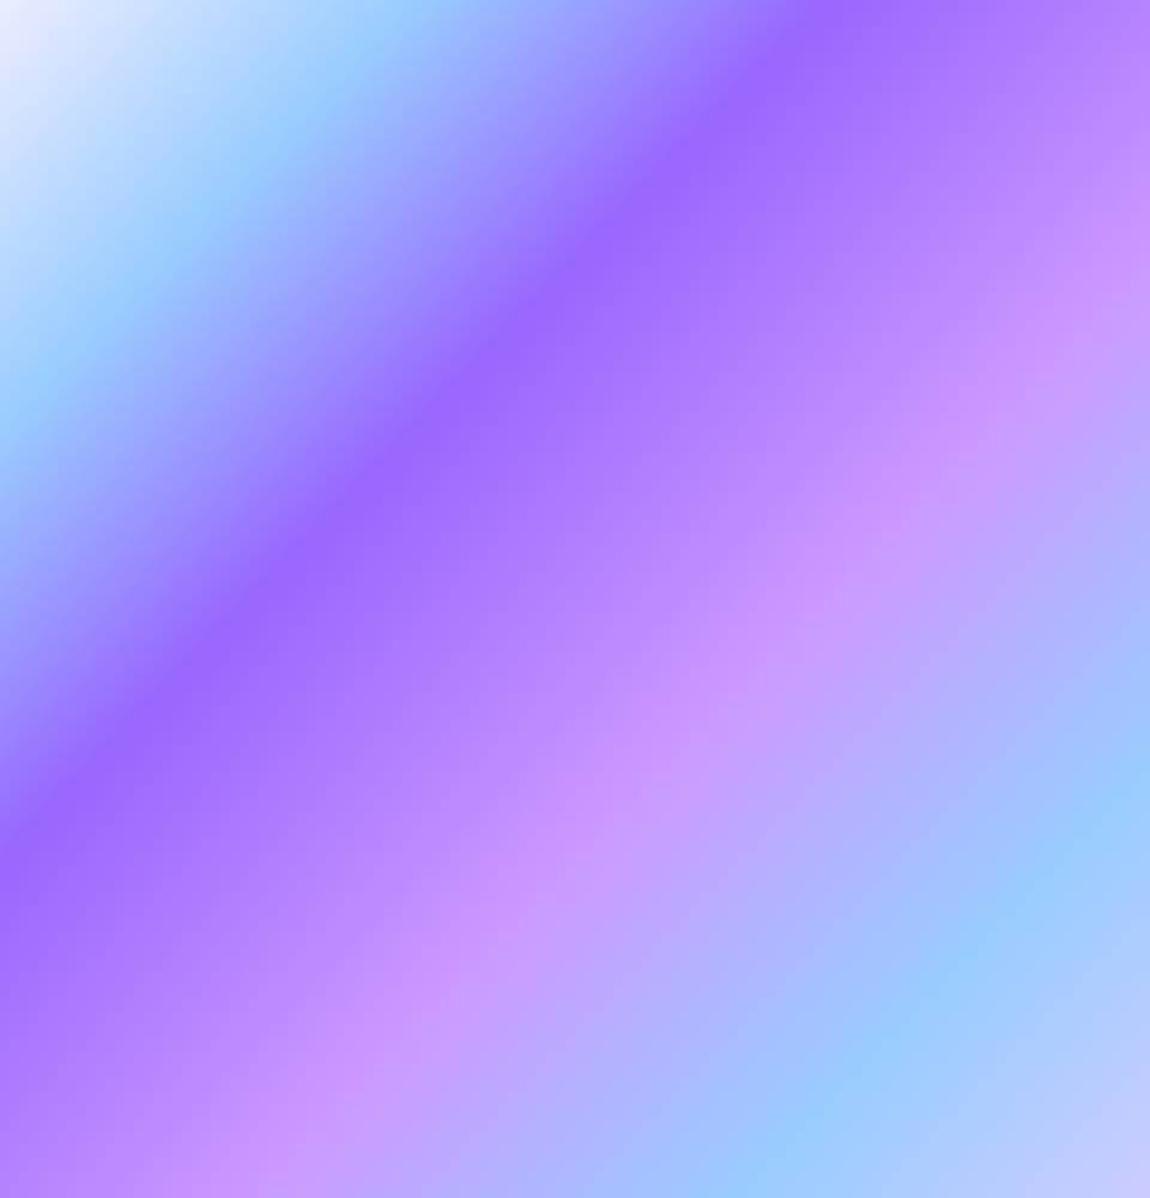 Top Purple And Light Blue Purple Image for